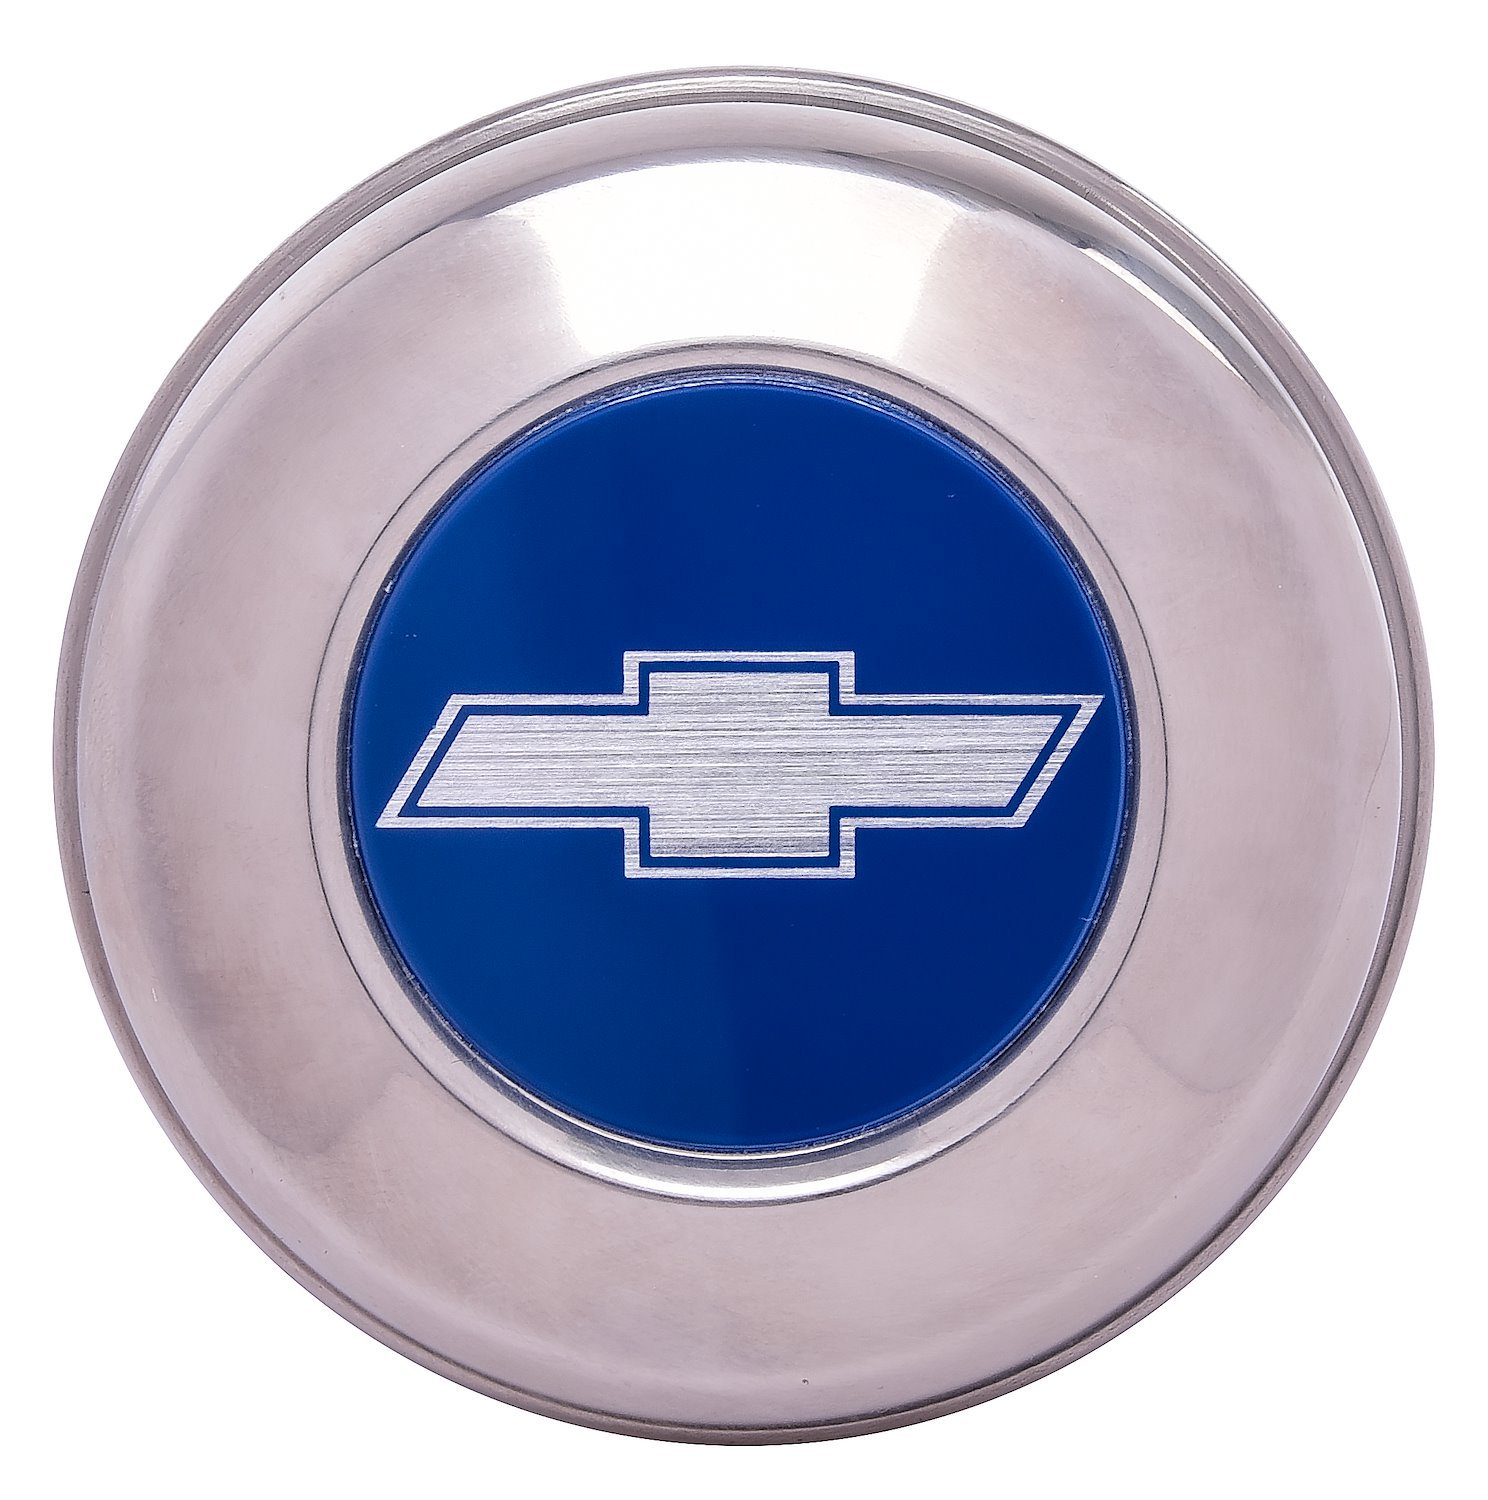 JEGS 555-79880: Bowtie Wheel Center Cap | 1970-1975 Chevy Camaro Z28 |  1971-1972 Chevy Chevelle, El Camino SS | Fits 5-Spoke SS & Z/28 Wheels |  Stainless Steel | Blue Center With